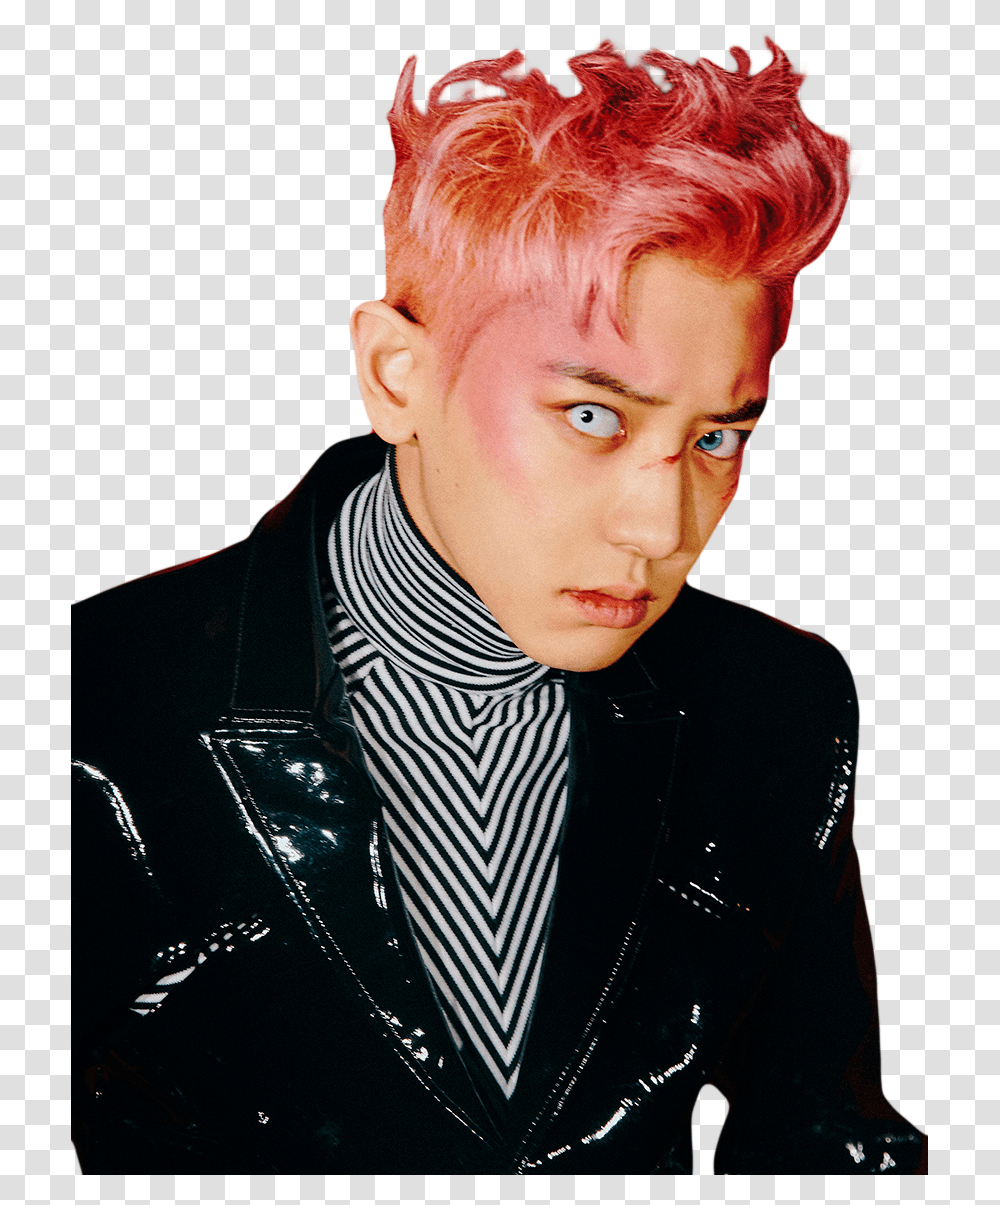 Parkchanyeol Chanyeol Exo Exochanyeol Chanyeolexo Chanyeol Obsession Era, Person, Face, Jacket Transparent Png